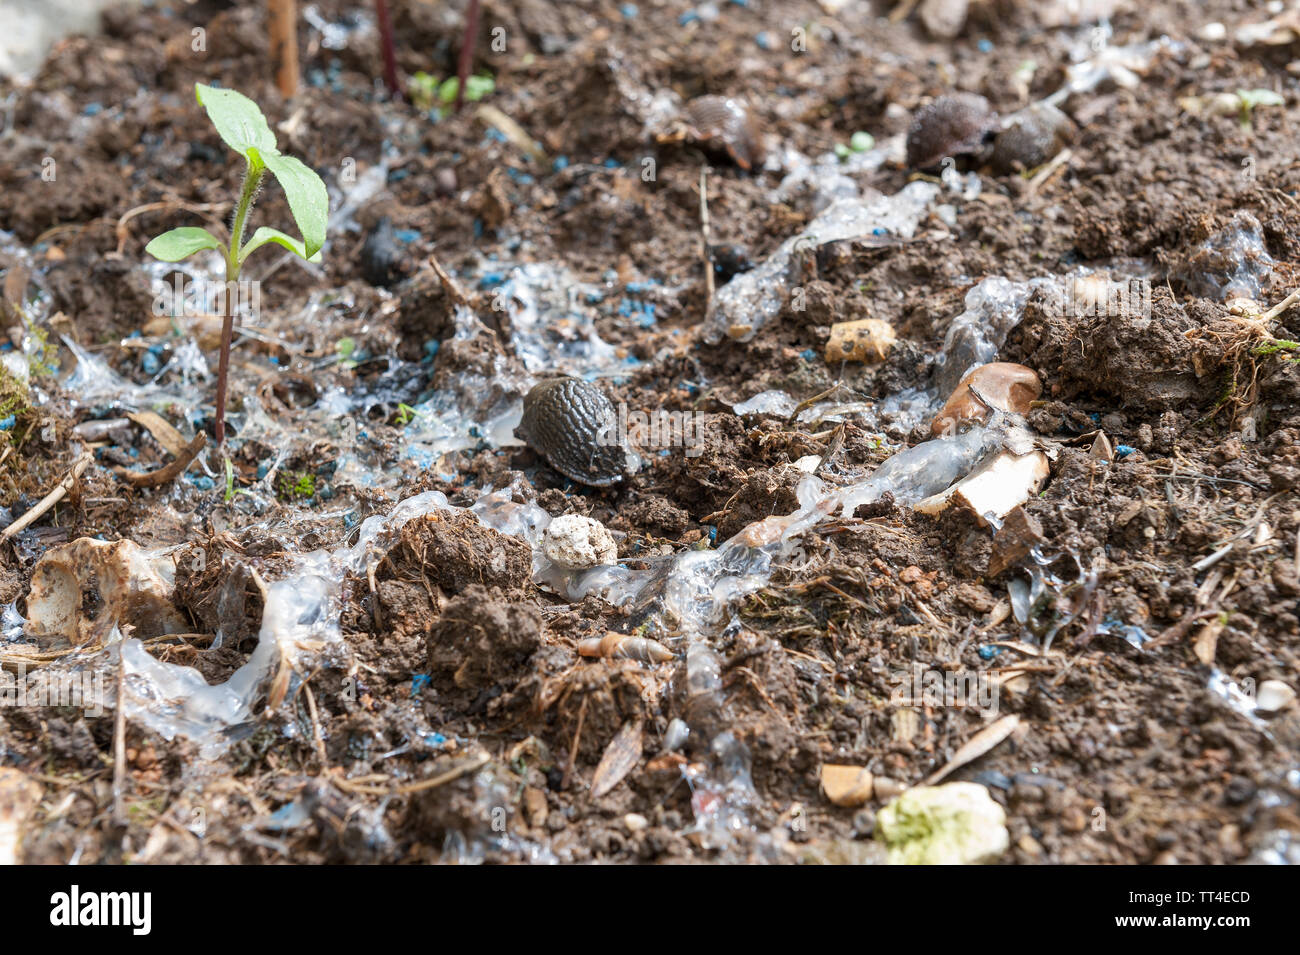 Metaldehyde slug pellets banned by DEFRA from Spring 2020 unacceptable risk to birds and mammals, builds up water table large scale agricultural use Stock Photo